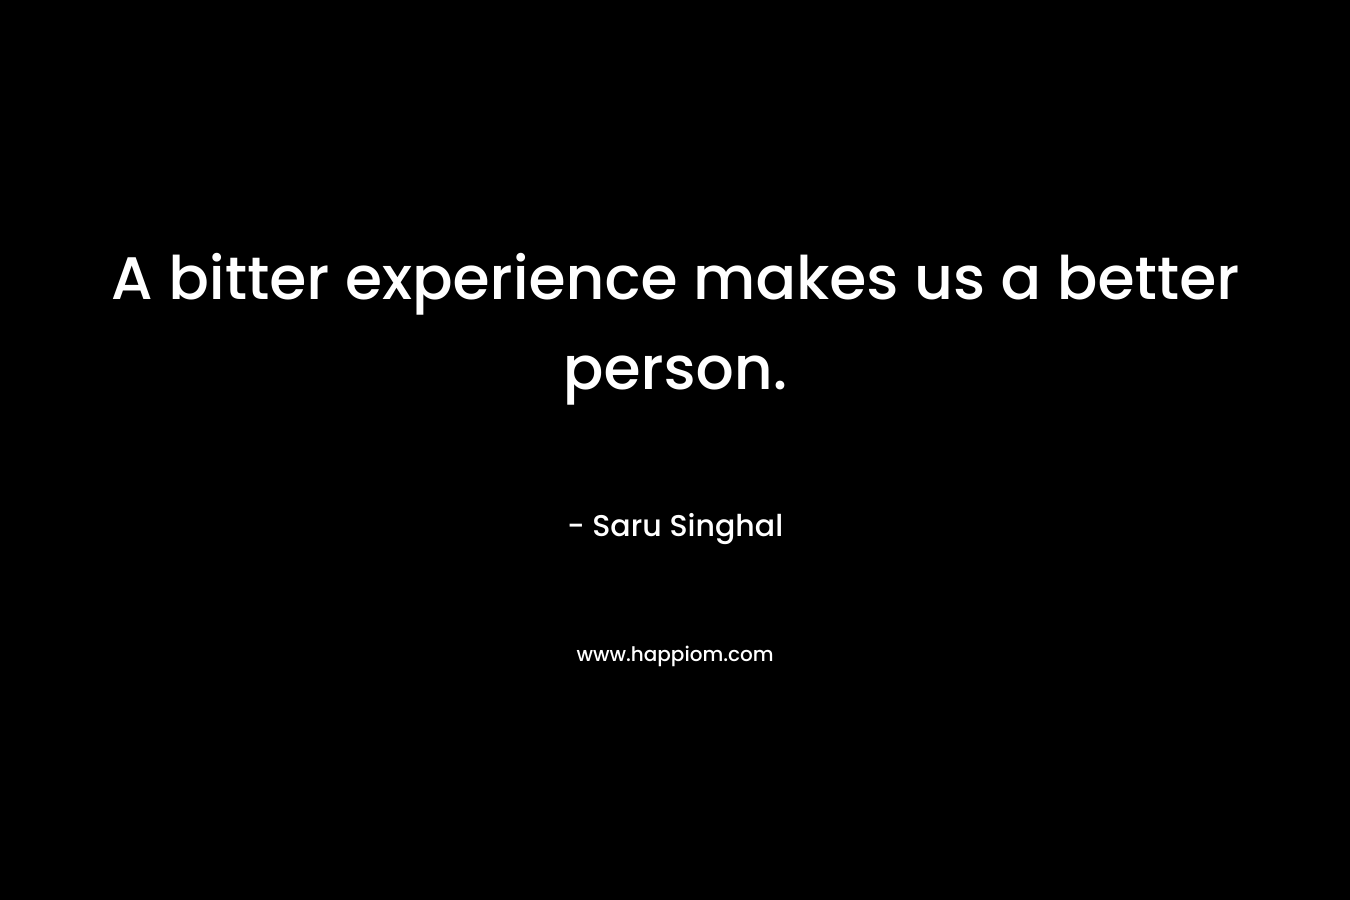 A bitter experience makes us a better person.